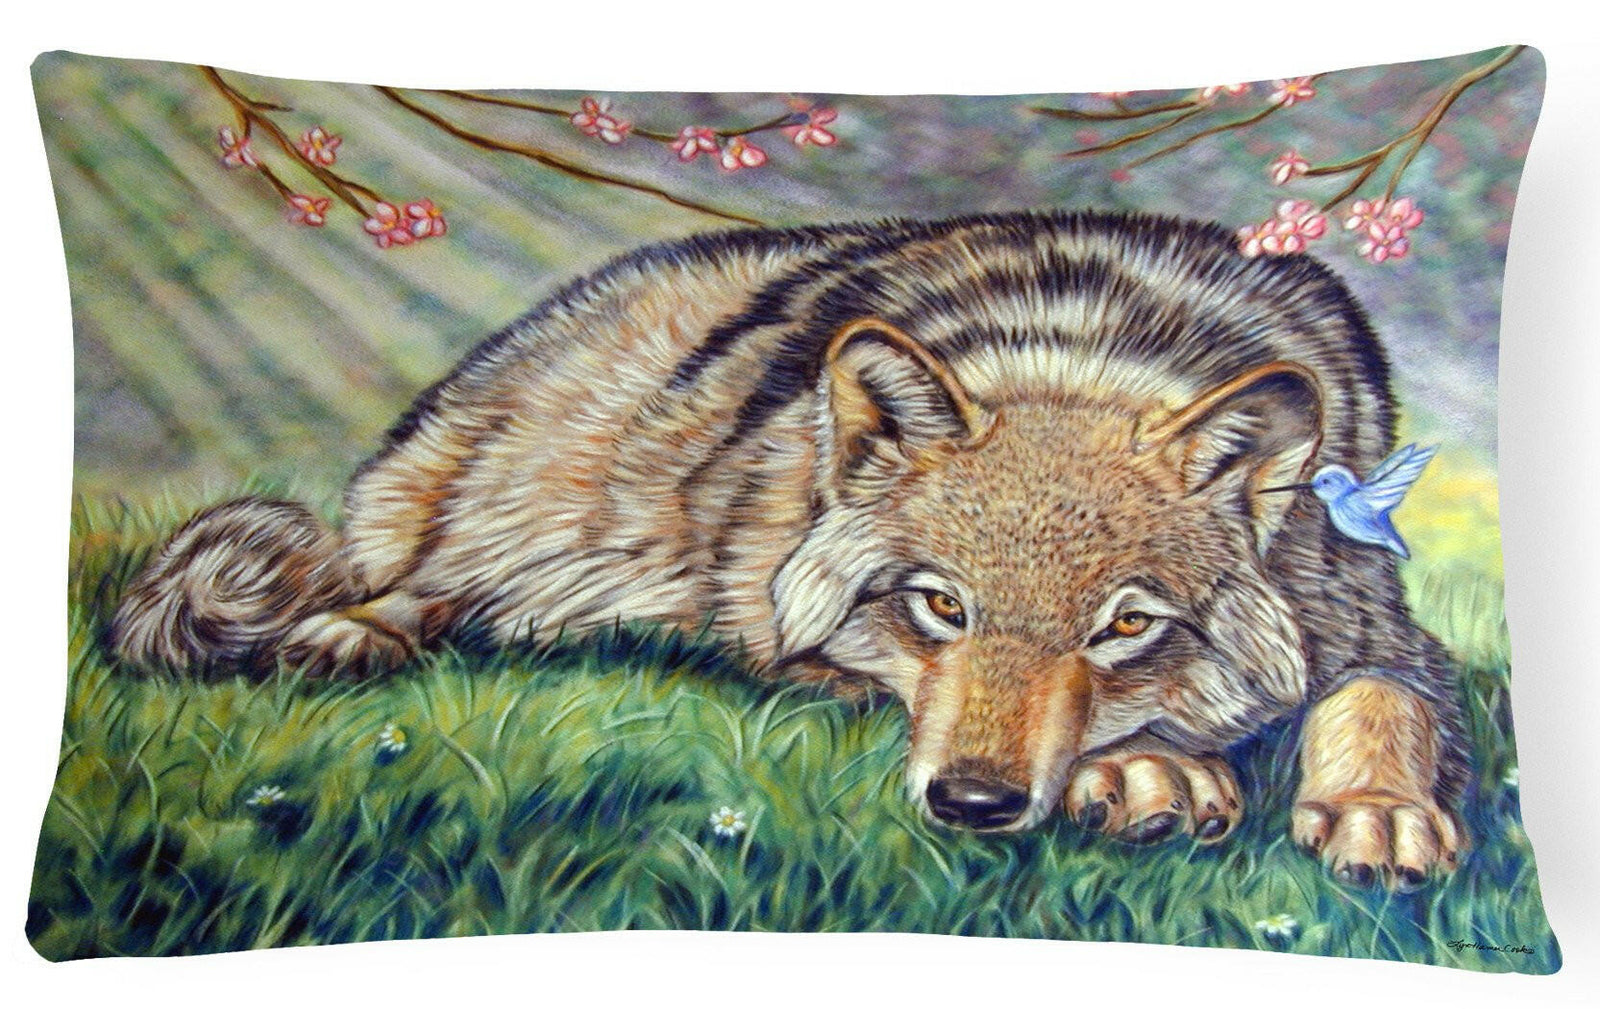 Wolf and Hummingbird Fabric Decorative Pillow 7356PW1216 by Caroline's Treasures